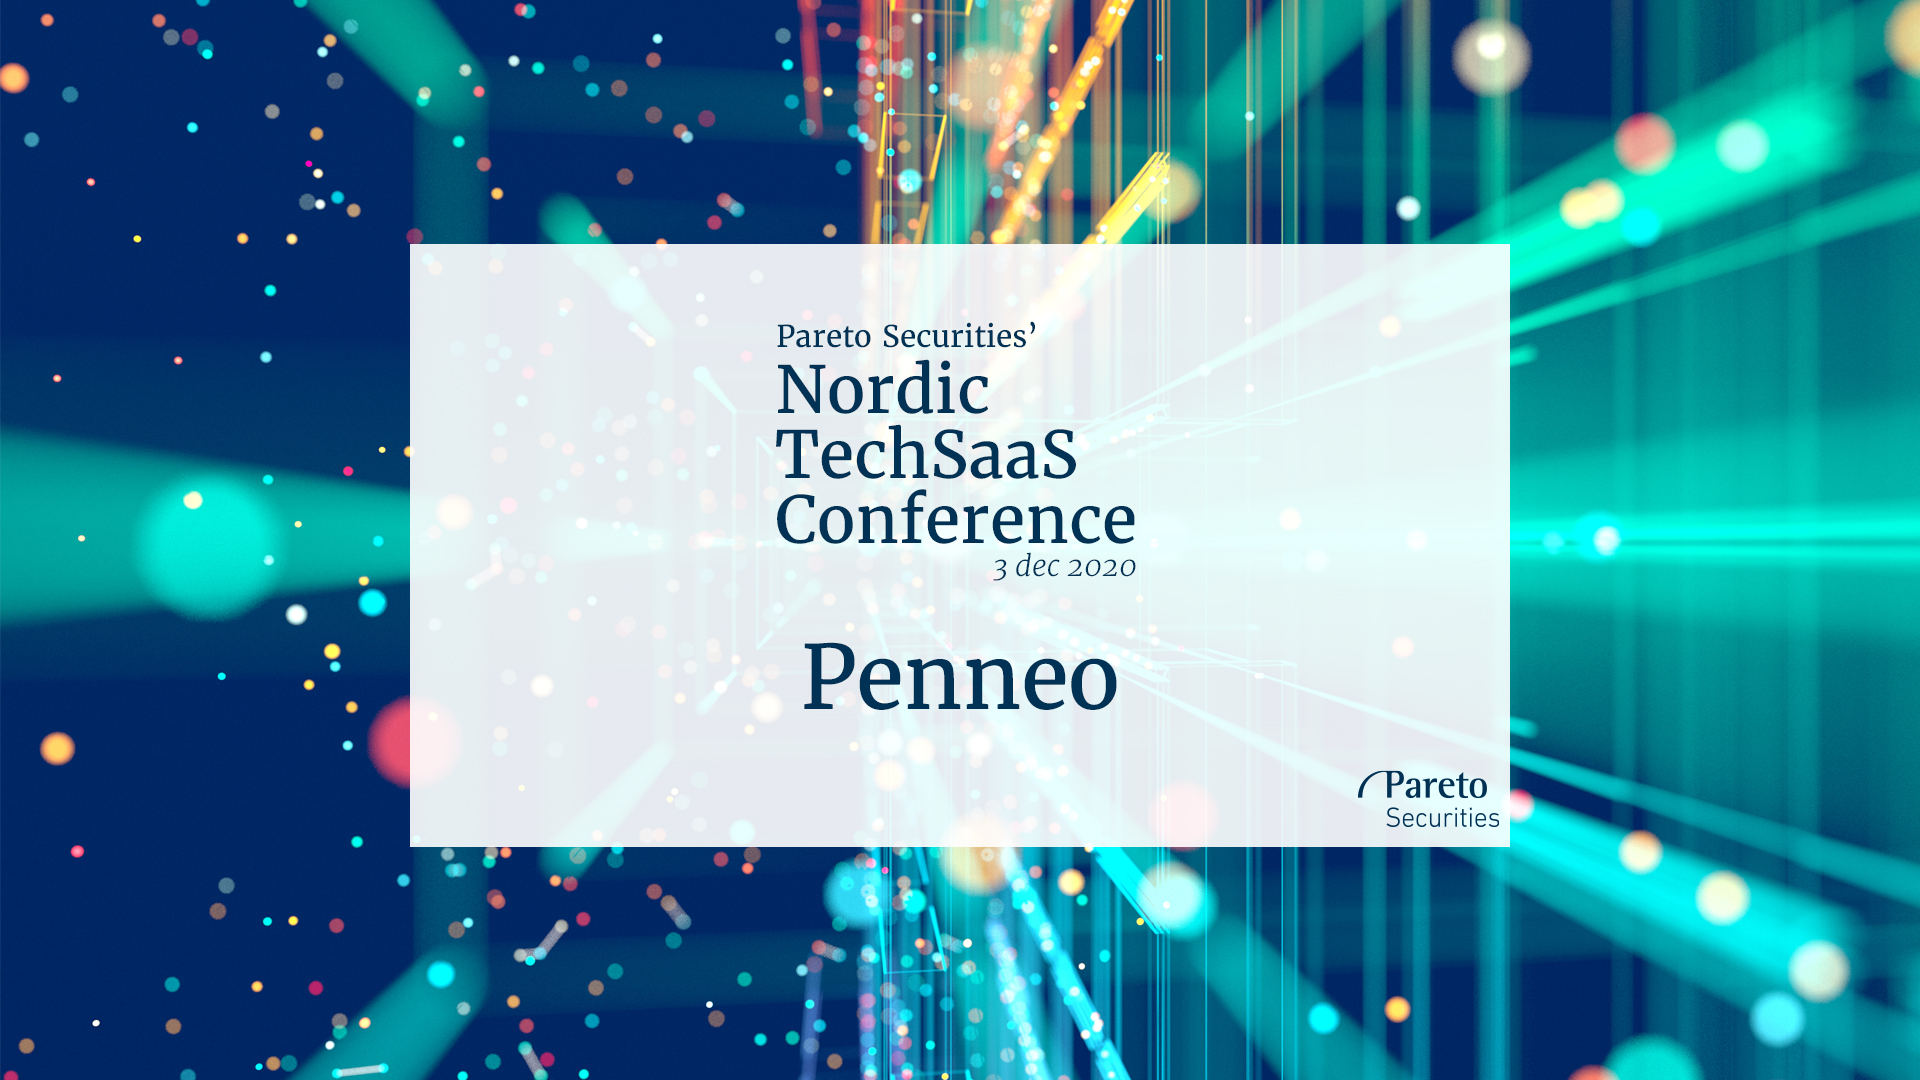 Penneo / Pareto Securities’ virtual Nordic TechSaaS Conference